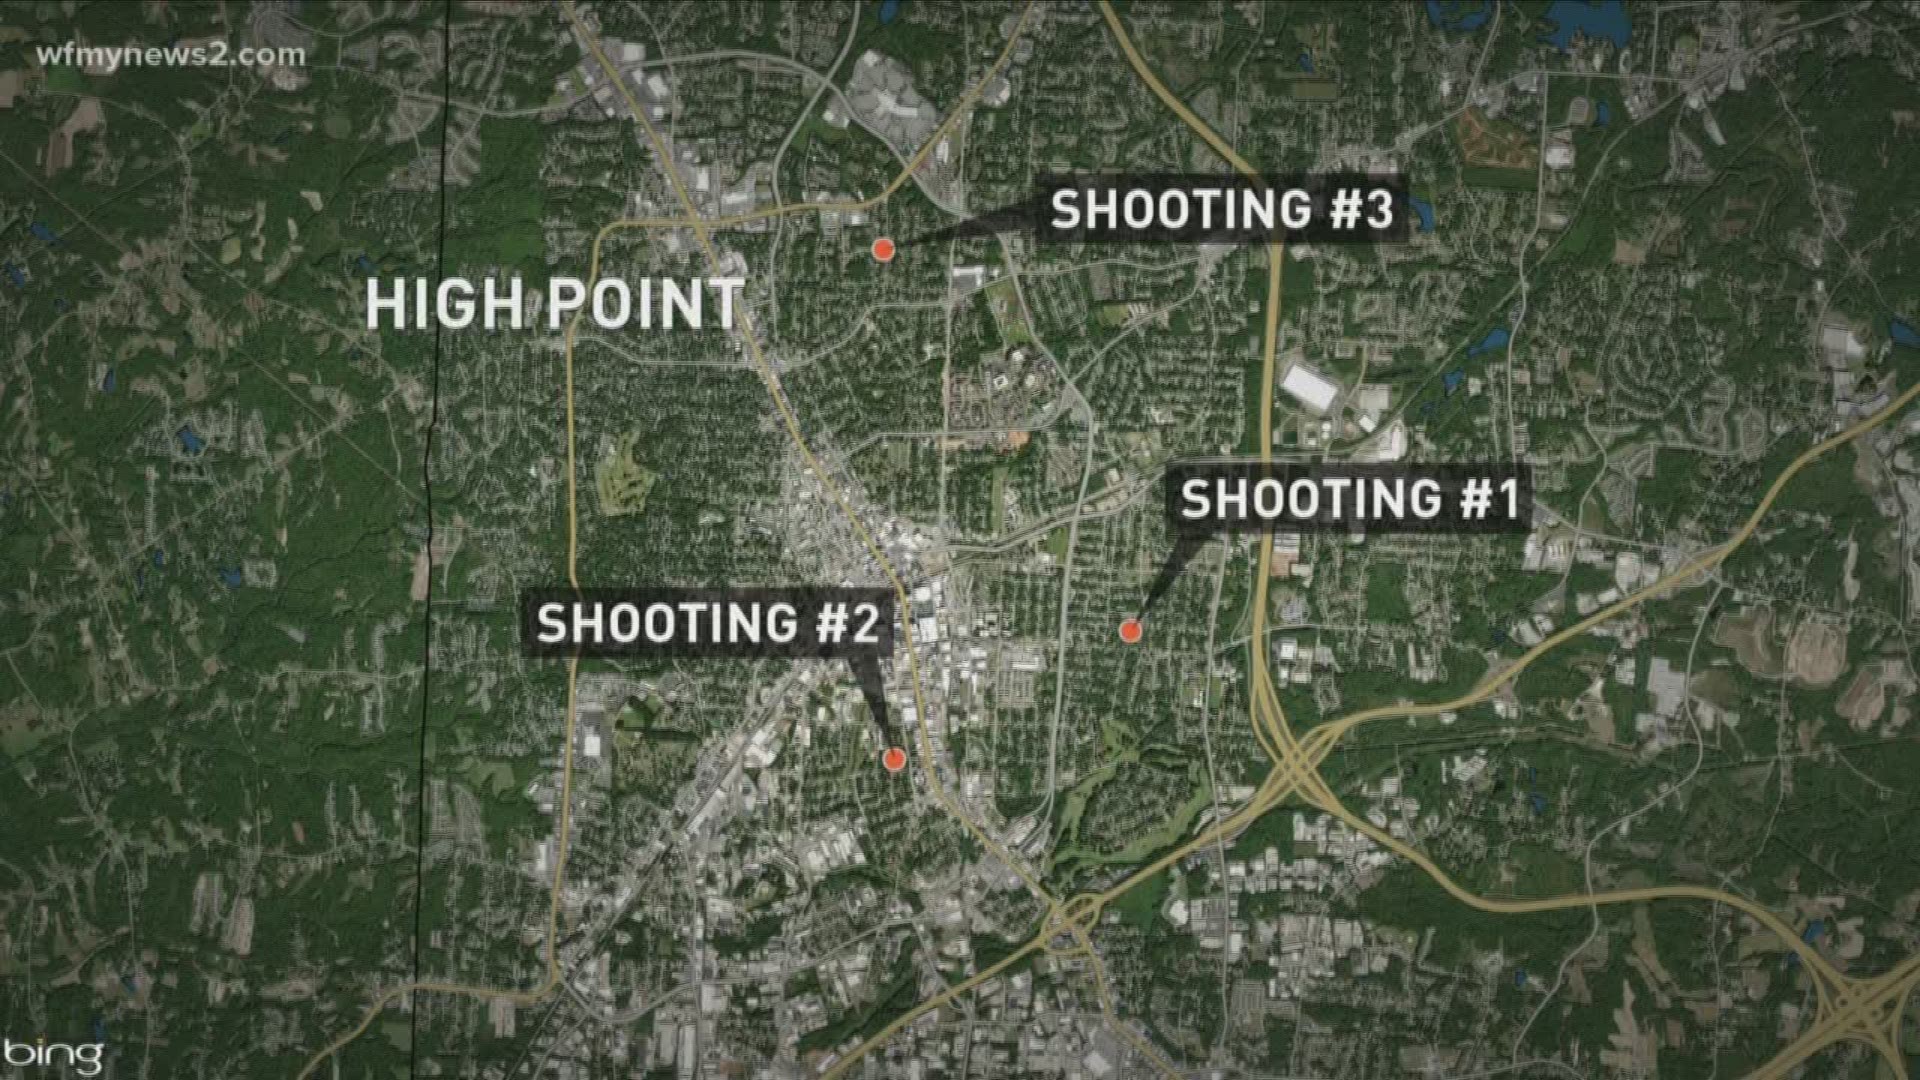 High Point Police Investigate 3 Shootings